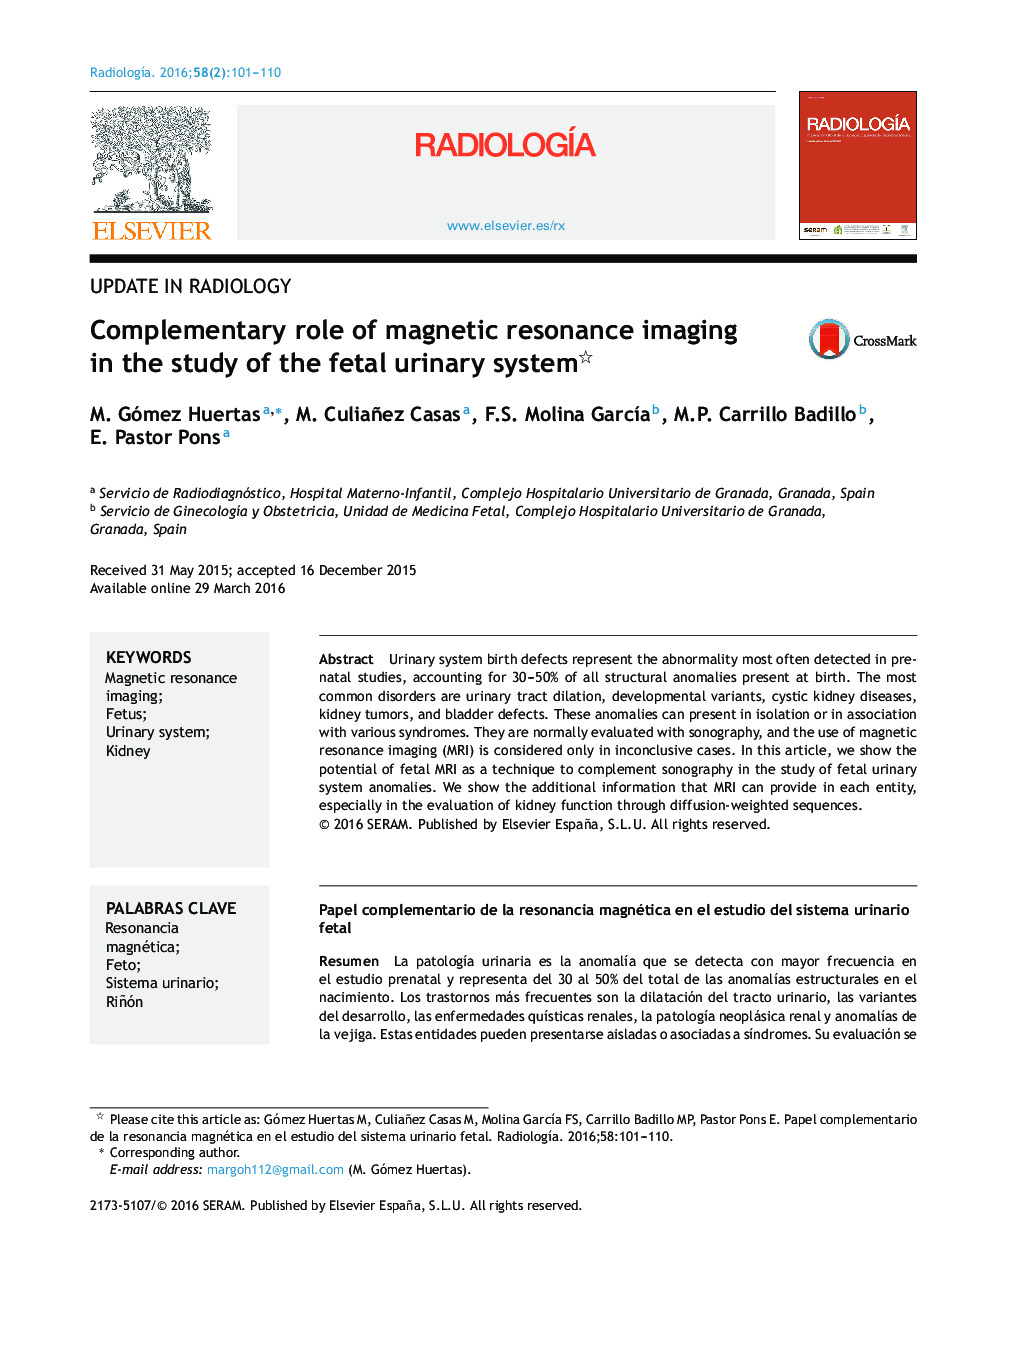 Complementary role of magnetic resonance imaging in the study of the fetal urinary system 